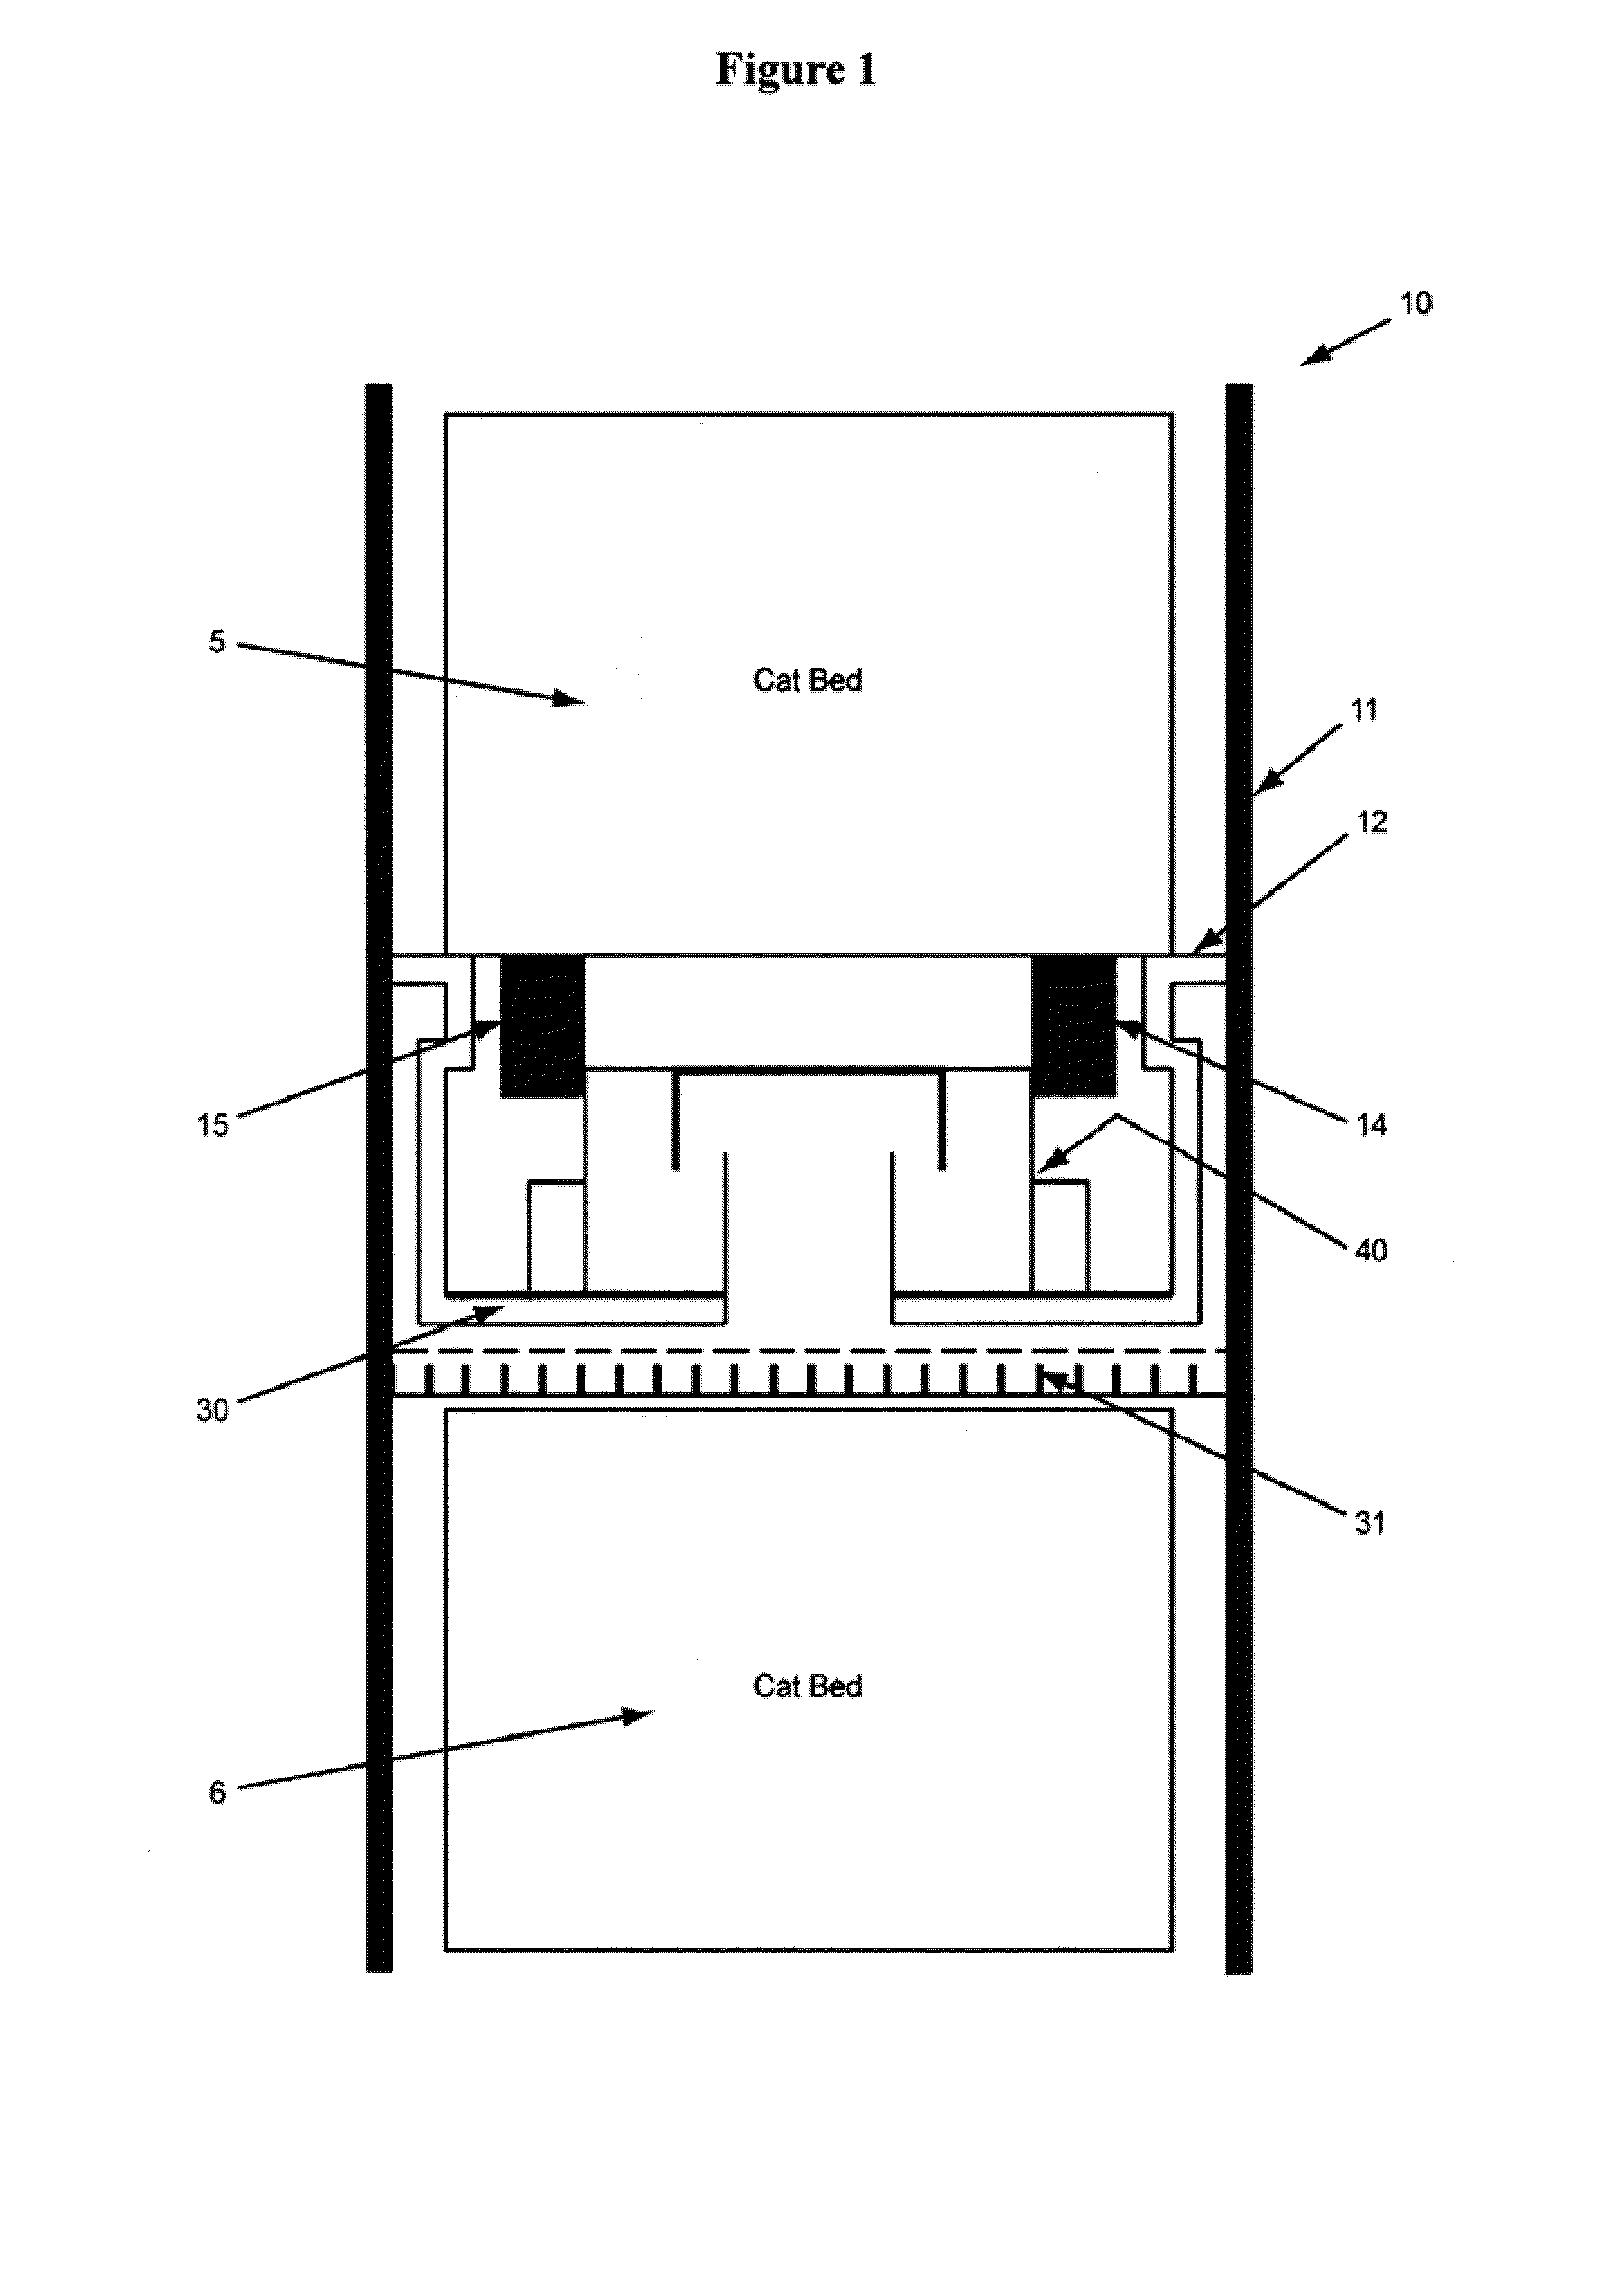 Mixing device for a down-flow reactor